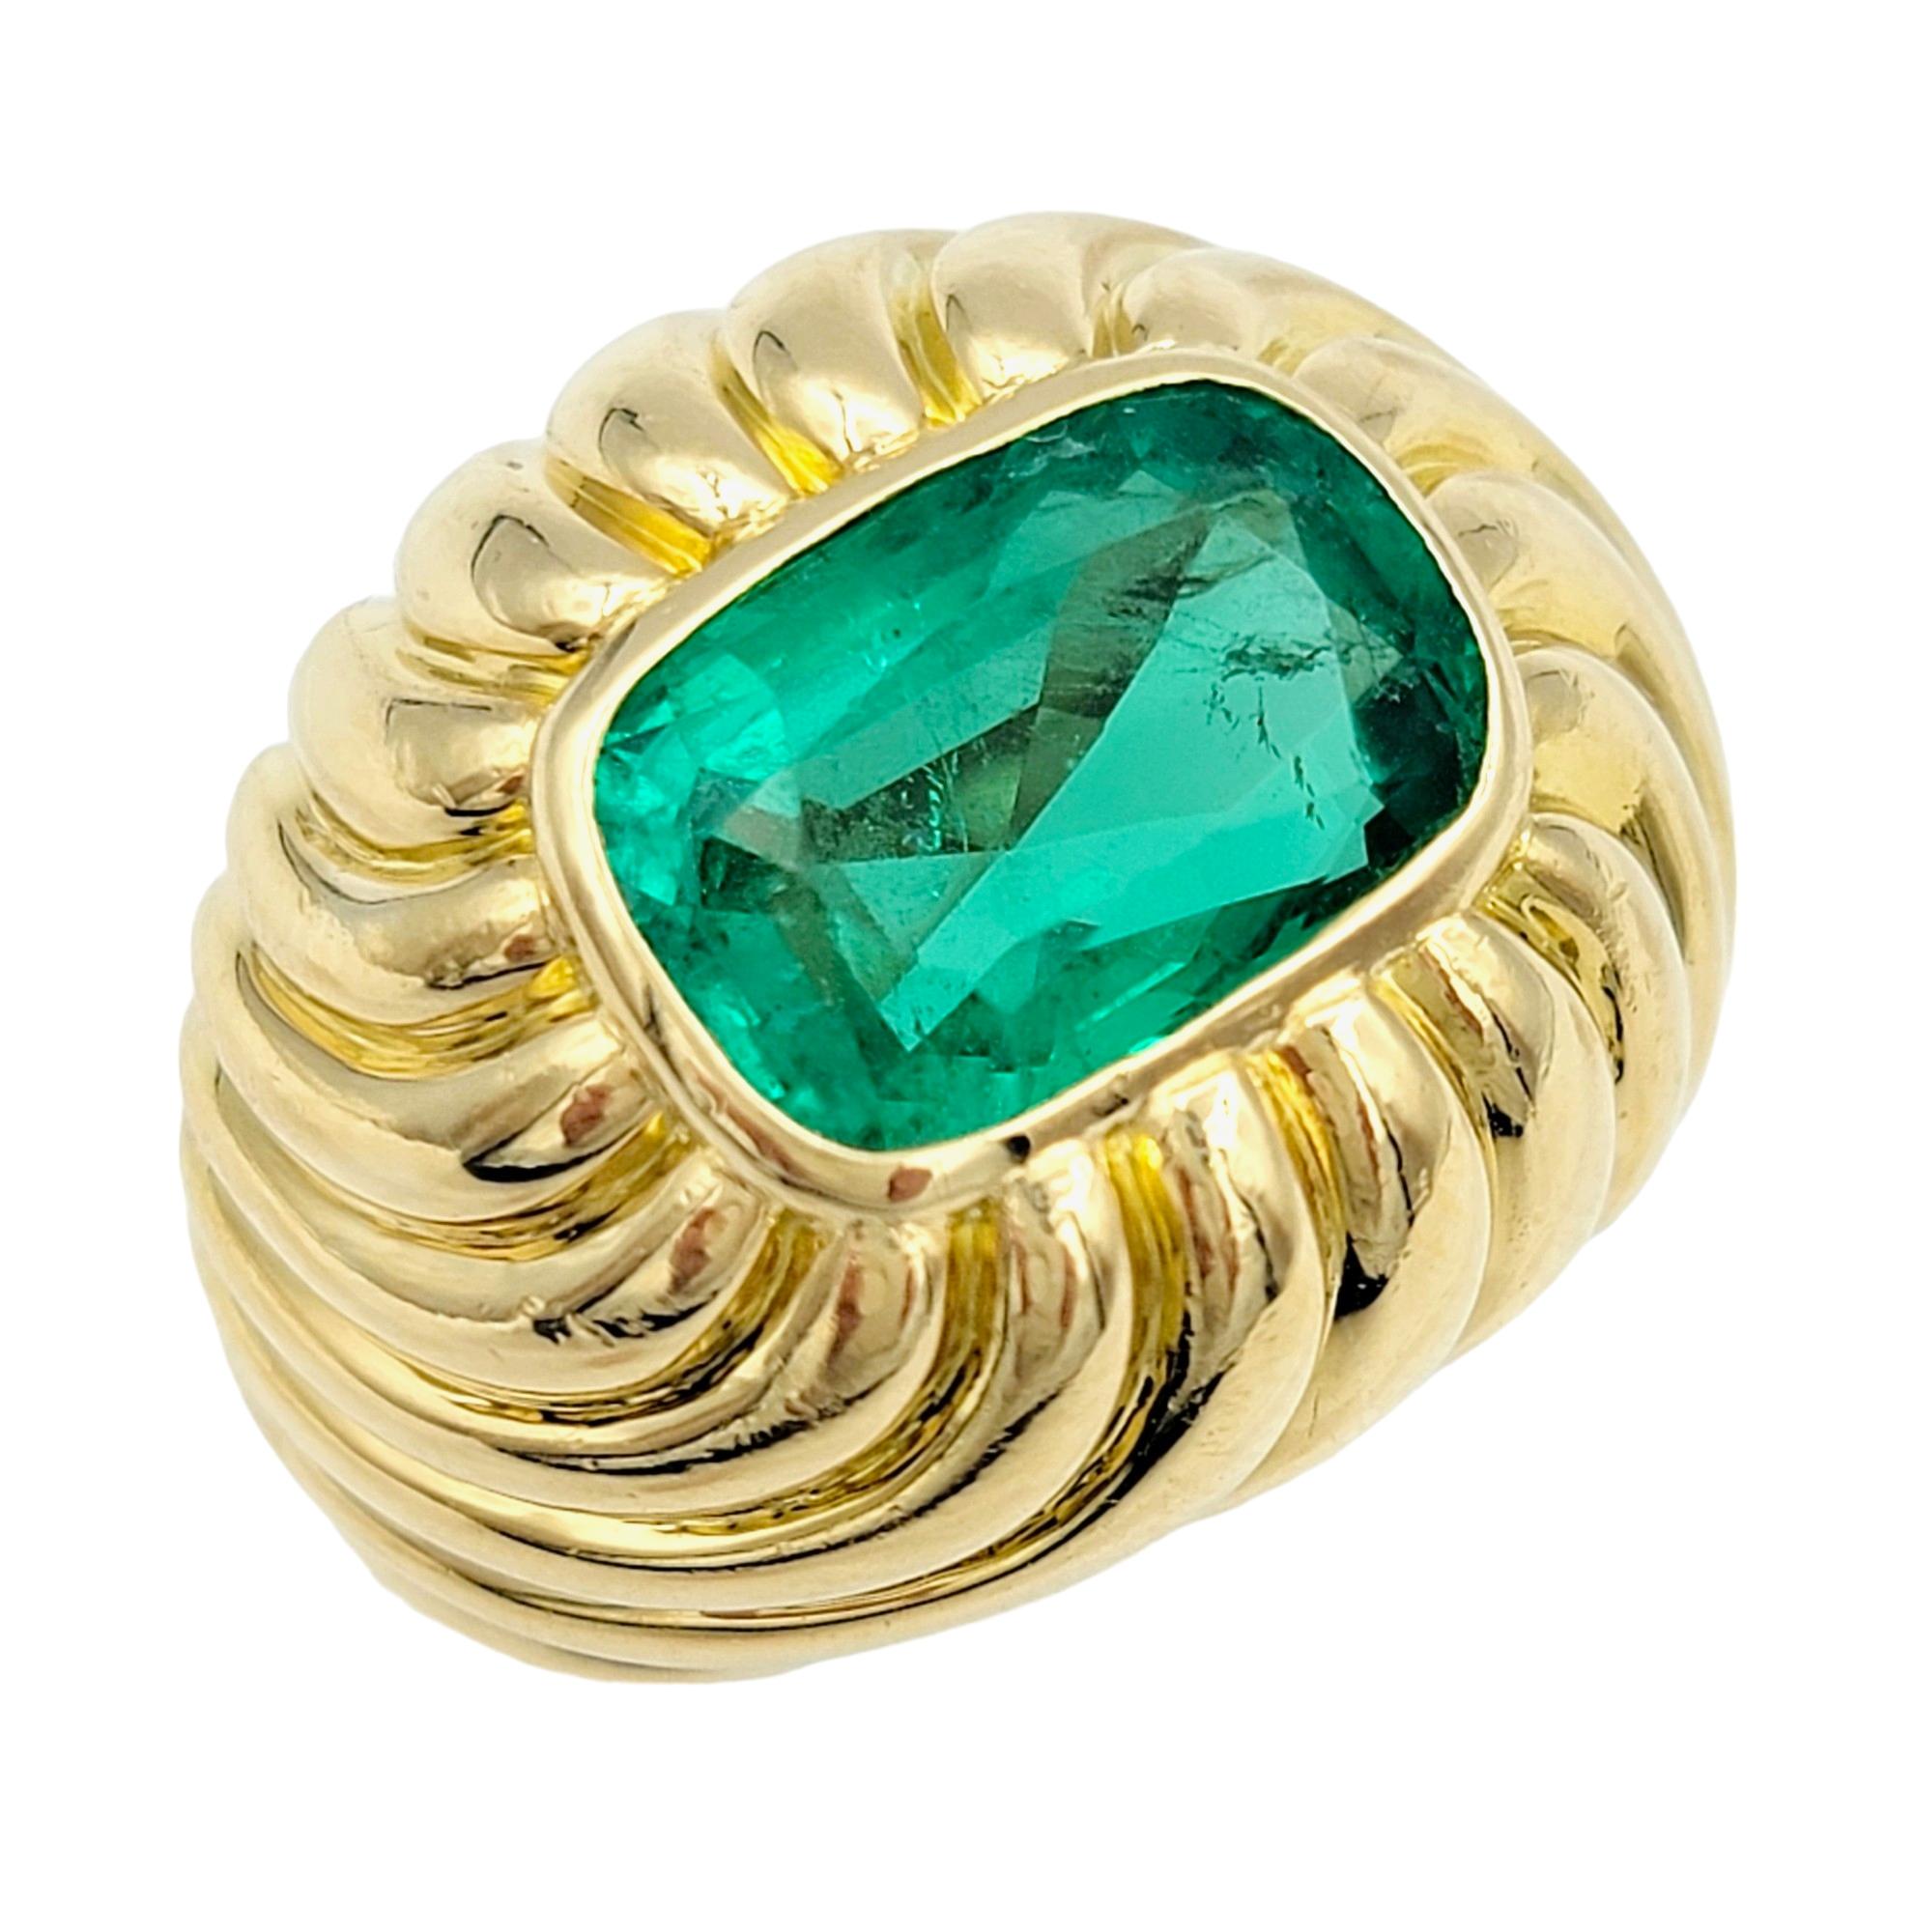 Ring Size: 6.5

This elegant emerald dome solitaire ring, set in opulent 18 karat yellow gold, is a striking piece that commands attention. The centerpiece of this ring is a cushion-cut emerald, showcasing its vibrant green hue and exceptional